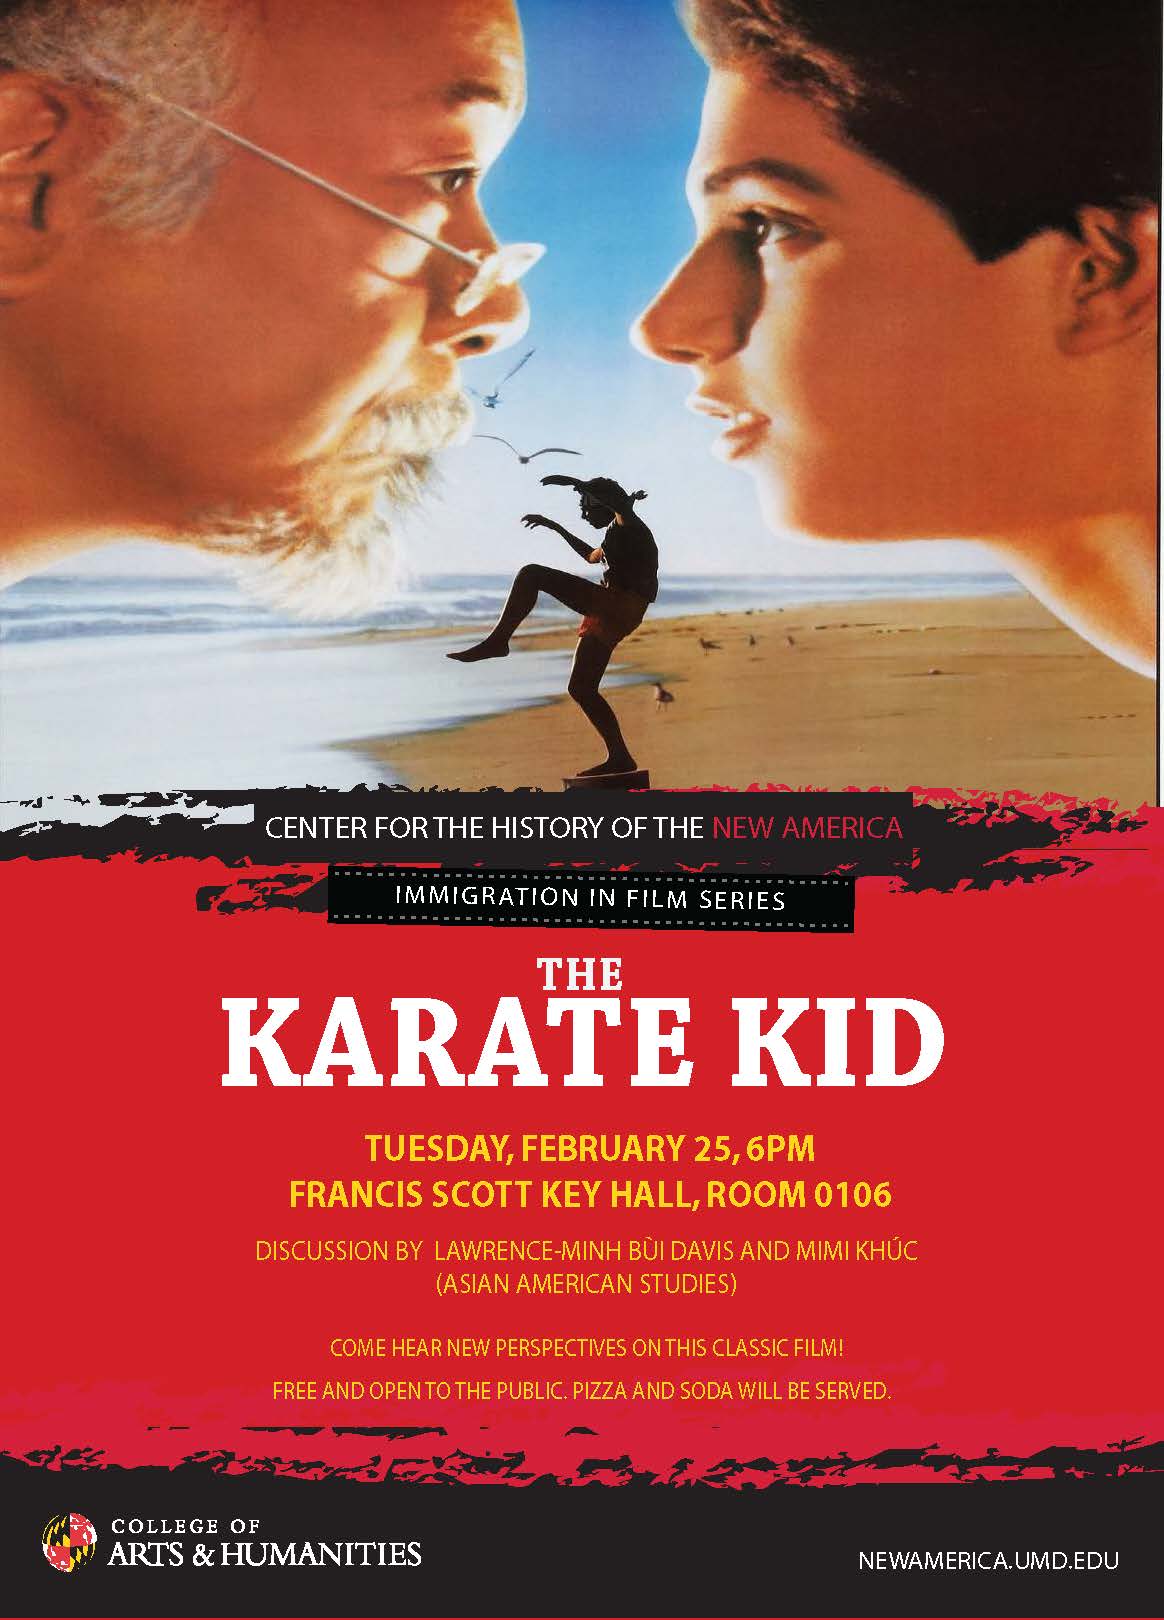 Image for event - CHNA Immigration in Film Series Spring 2014 presents Karate Kid